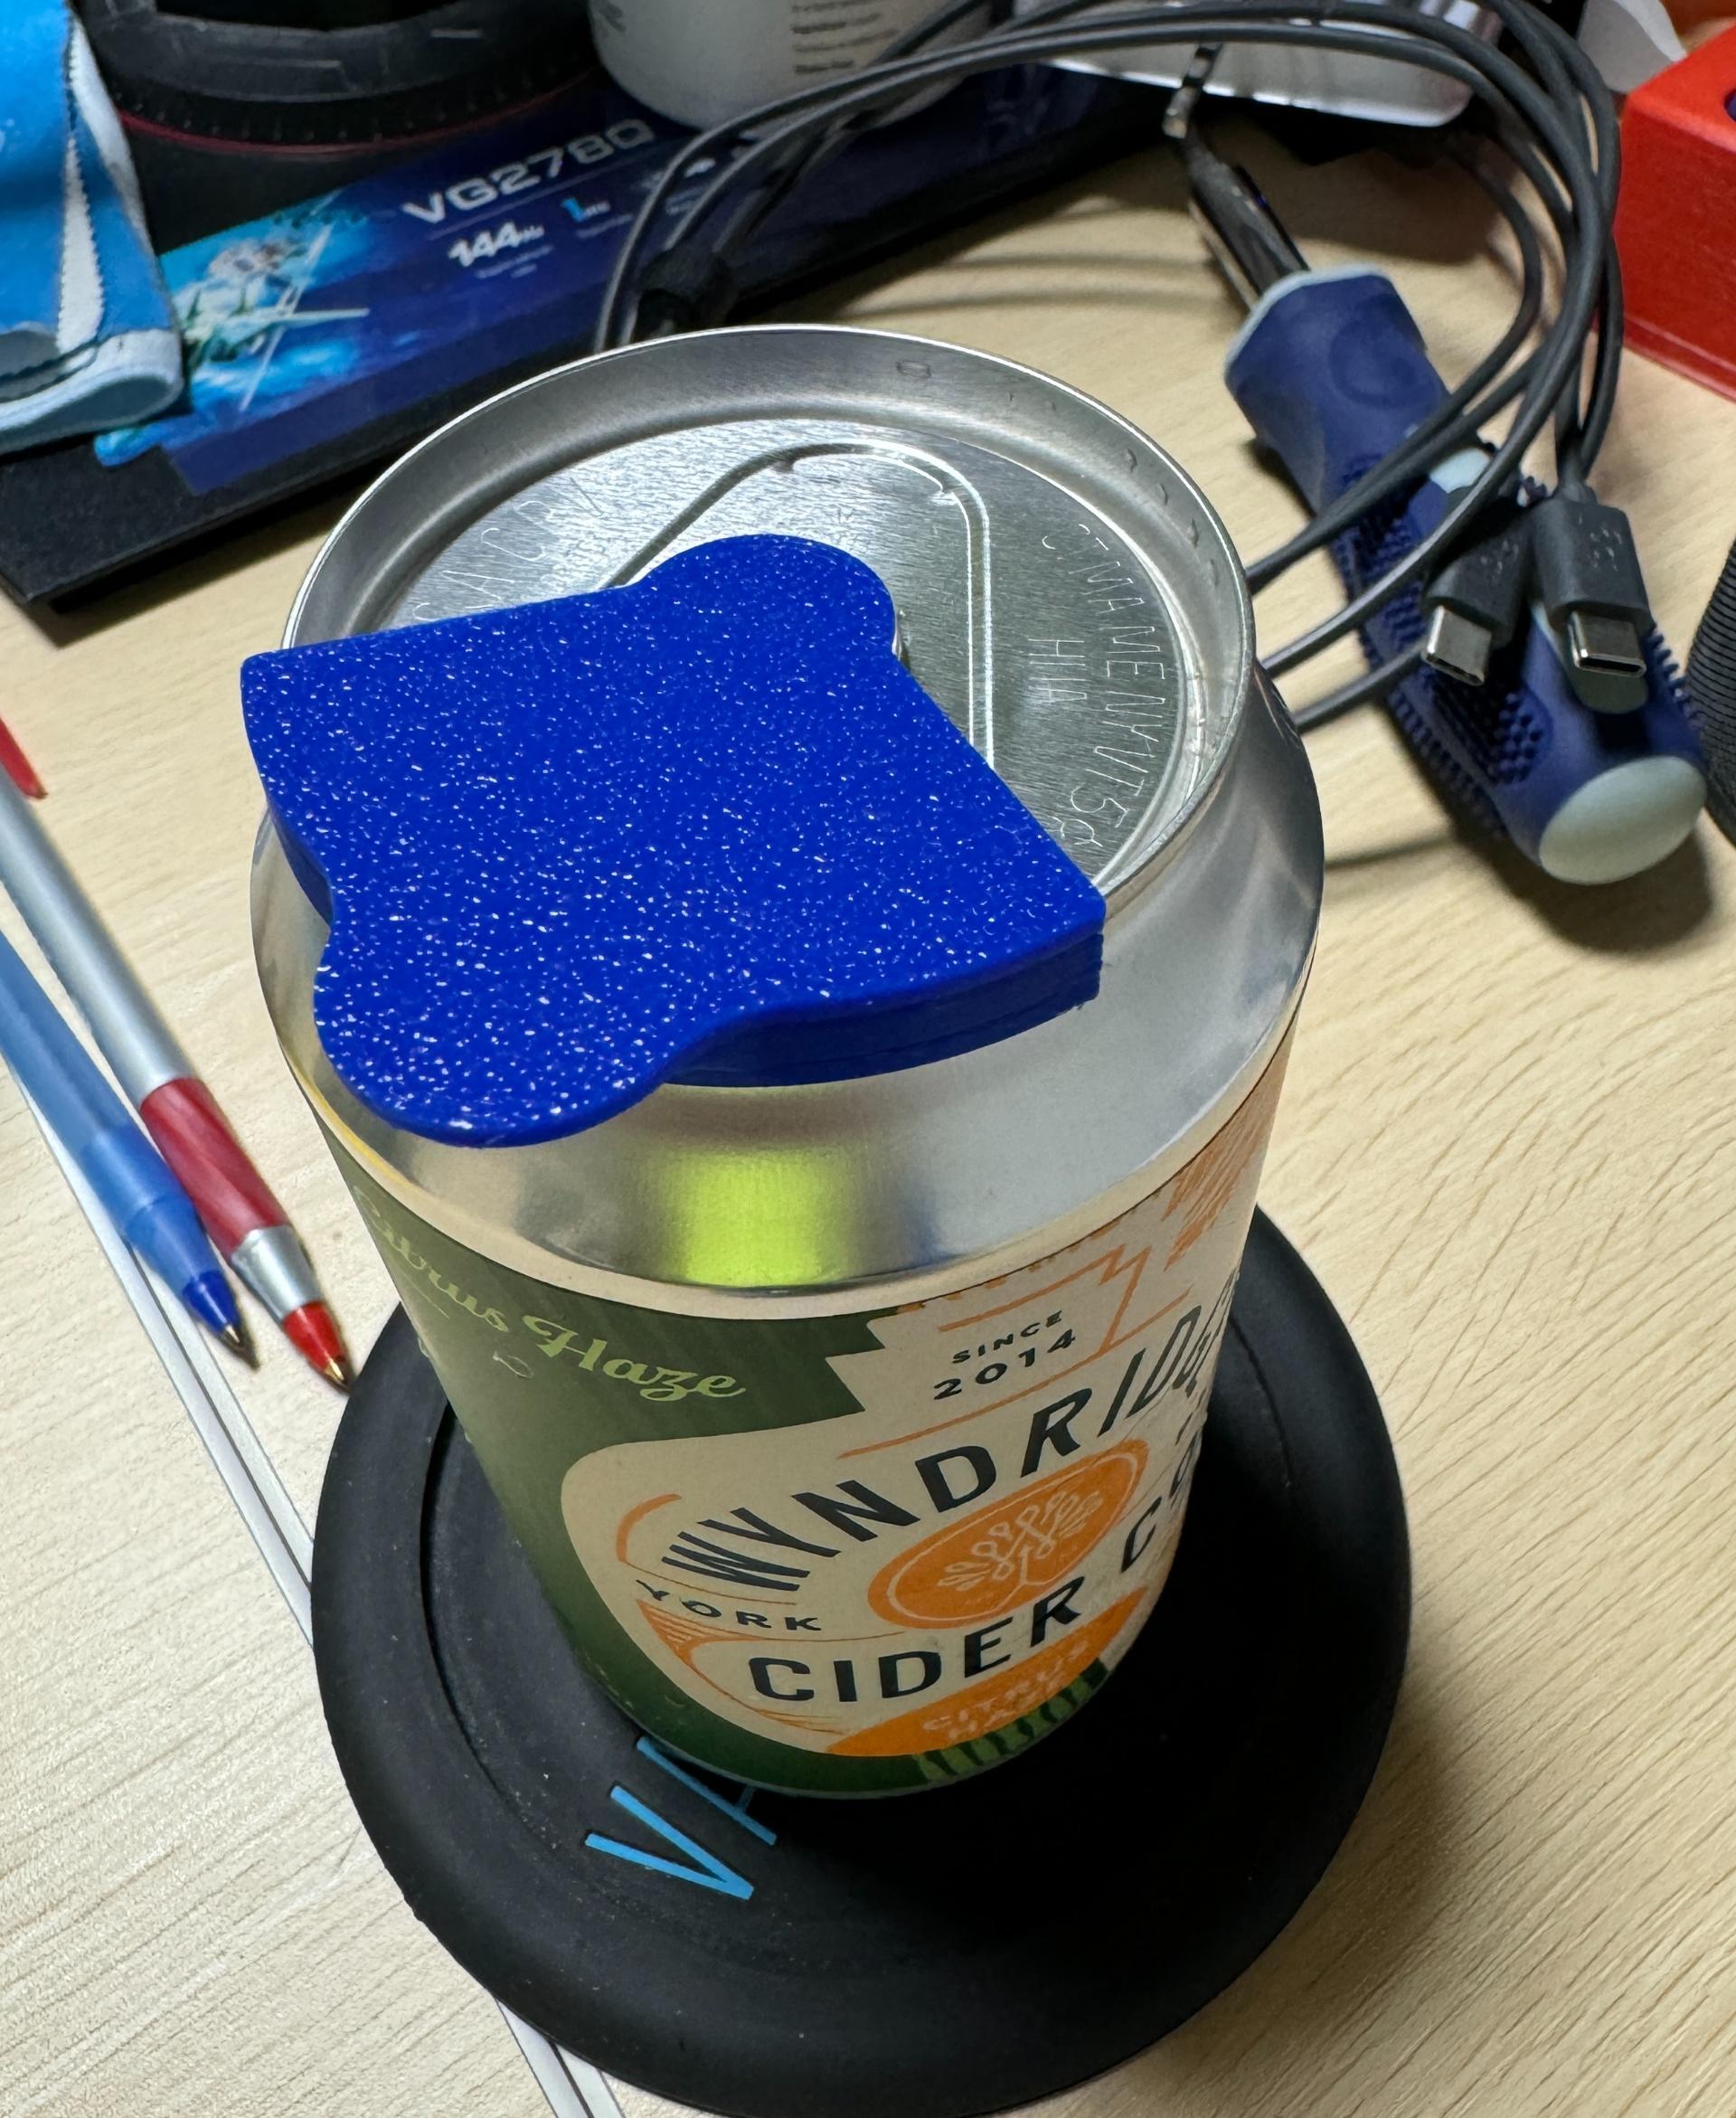 Drinks can cover/opener - OK, let's face it... this is great! Simple, quick print and functional straight away. And just in time for the summer need.

Awesome job, and thank you for sharing it! - 3d model